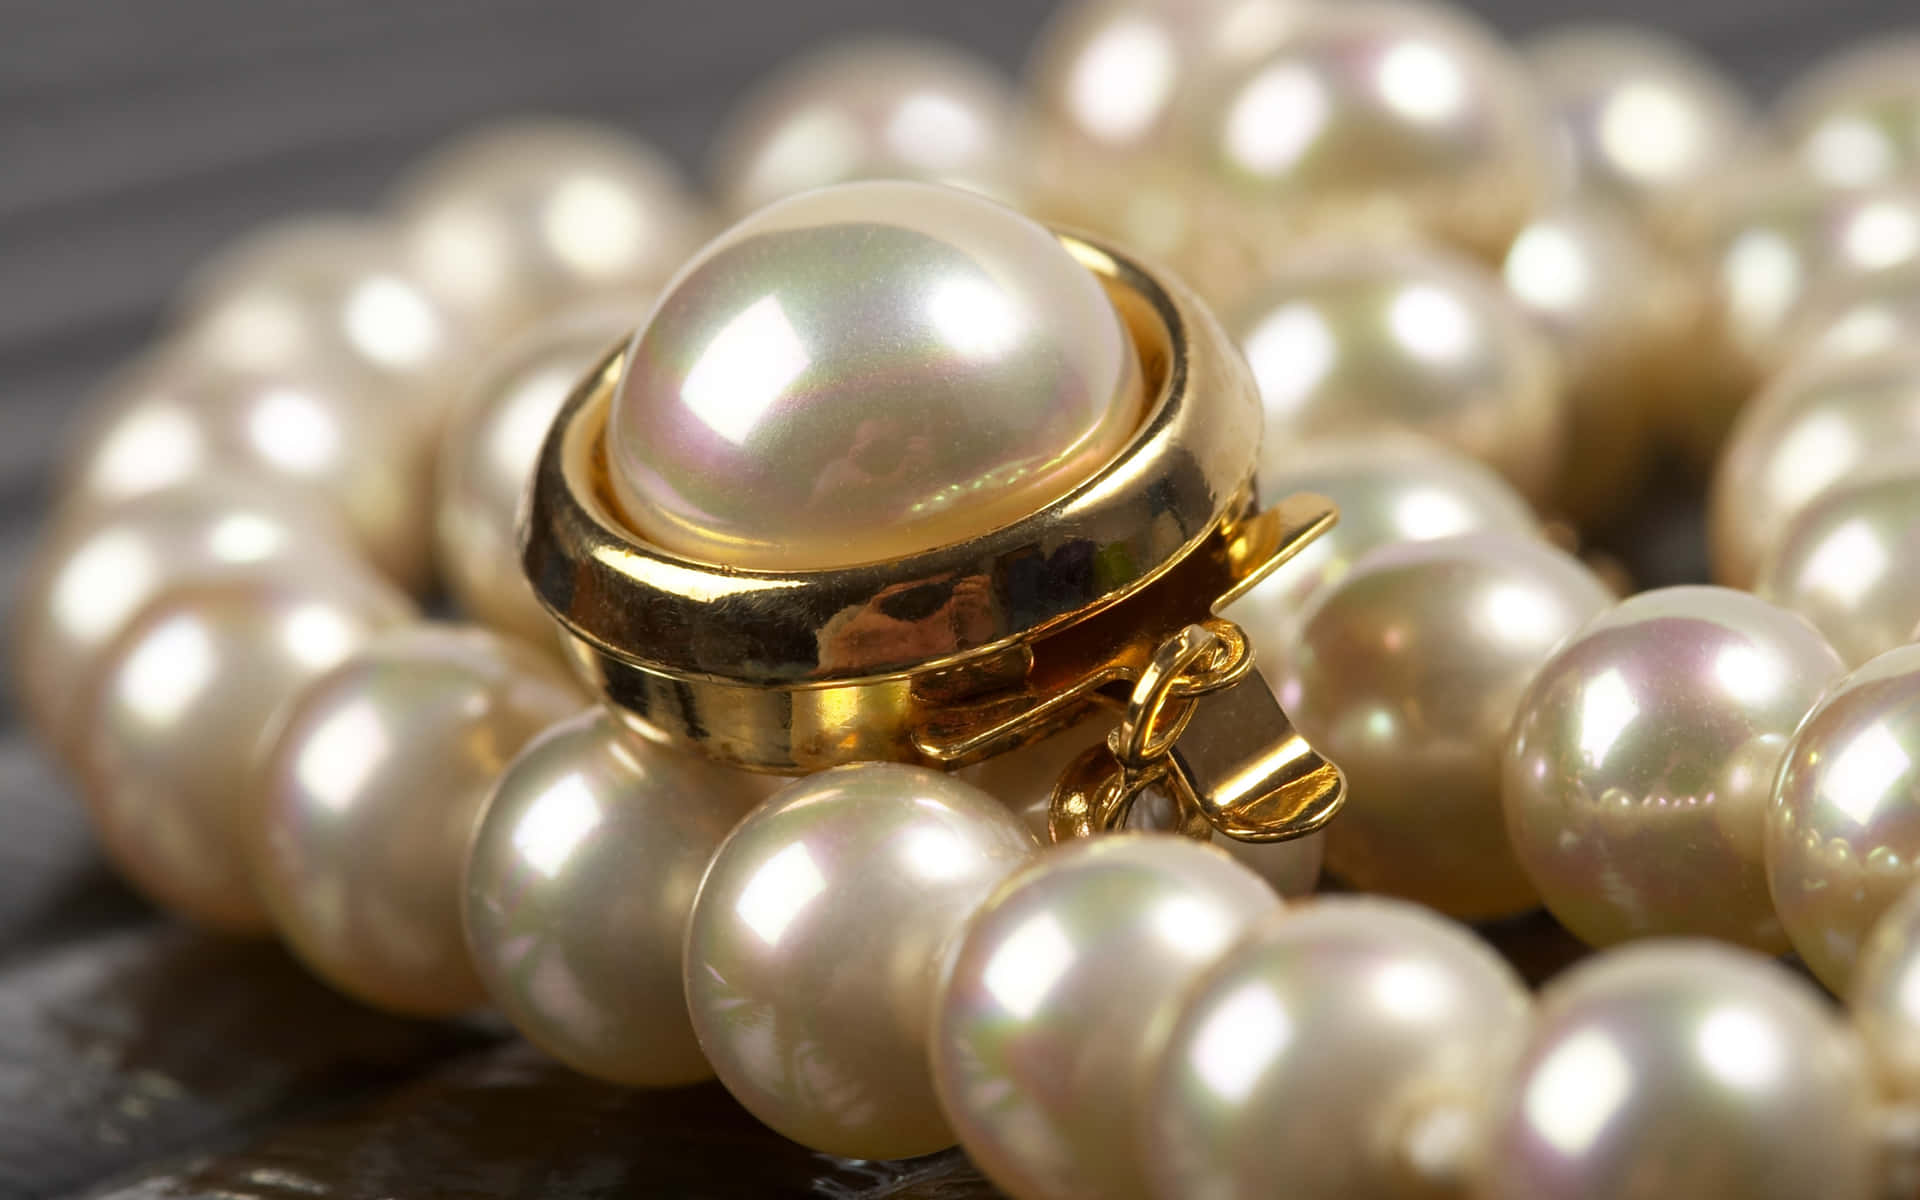 Pearls And Gold Ring On A Wooden Table